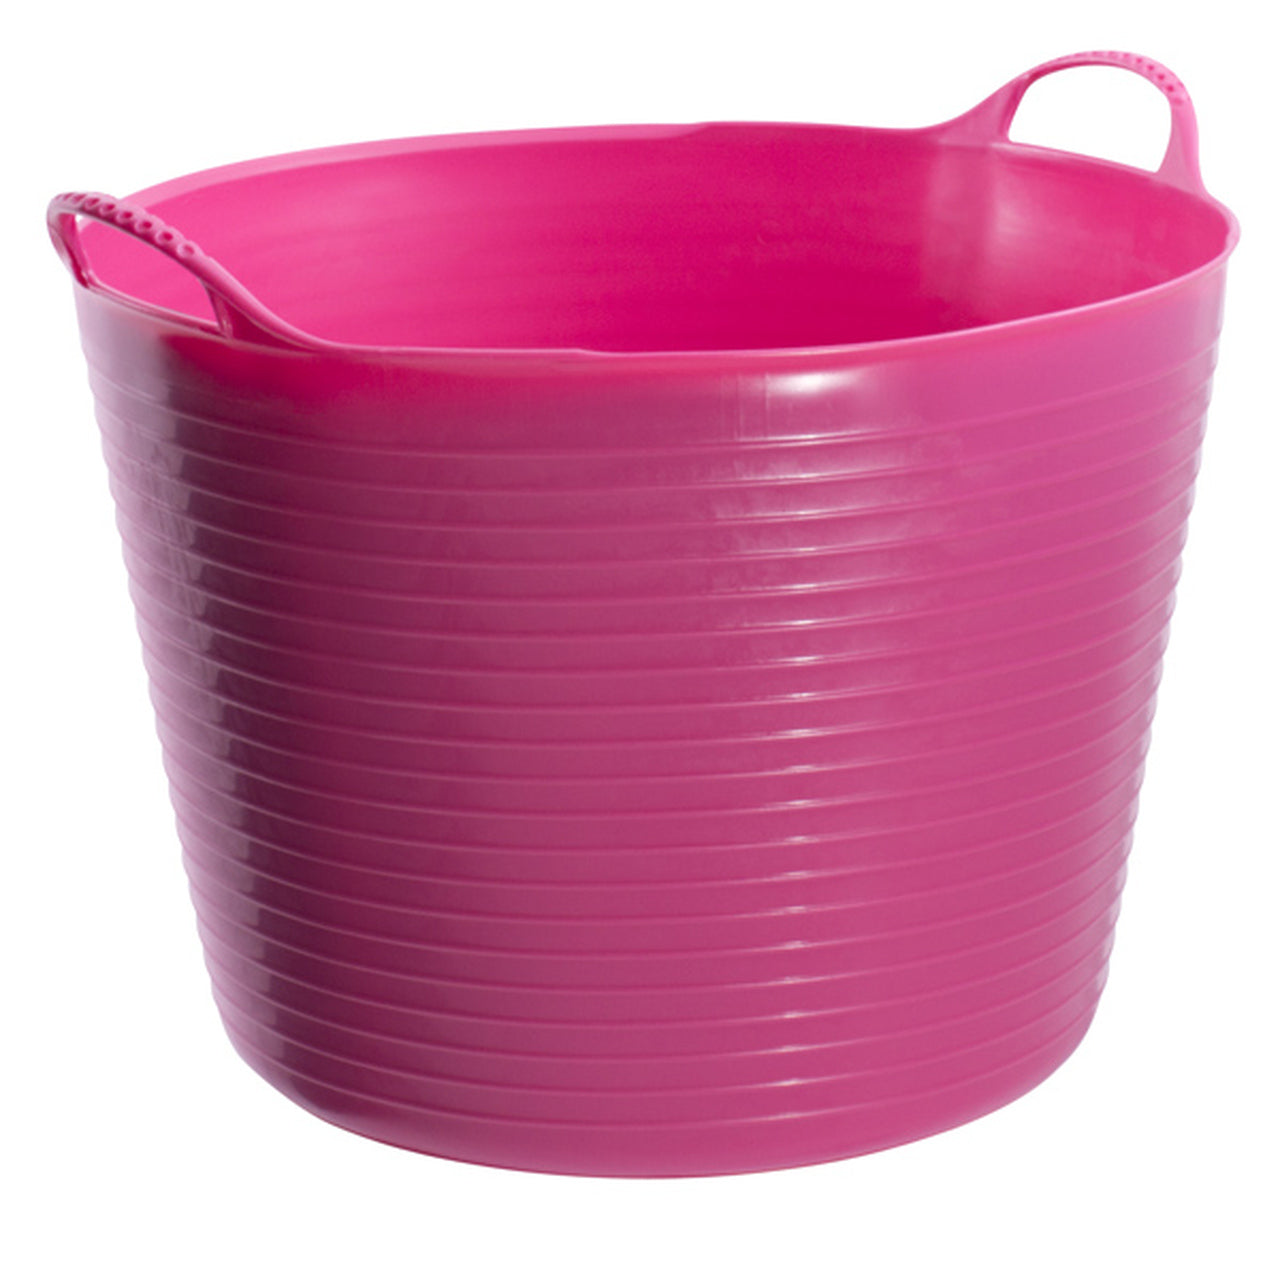 Large blue bucket with measurements on inside and two curved handles.